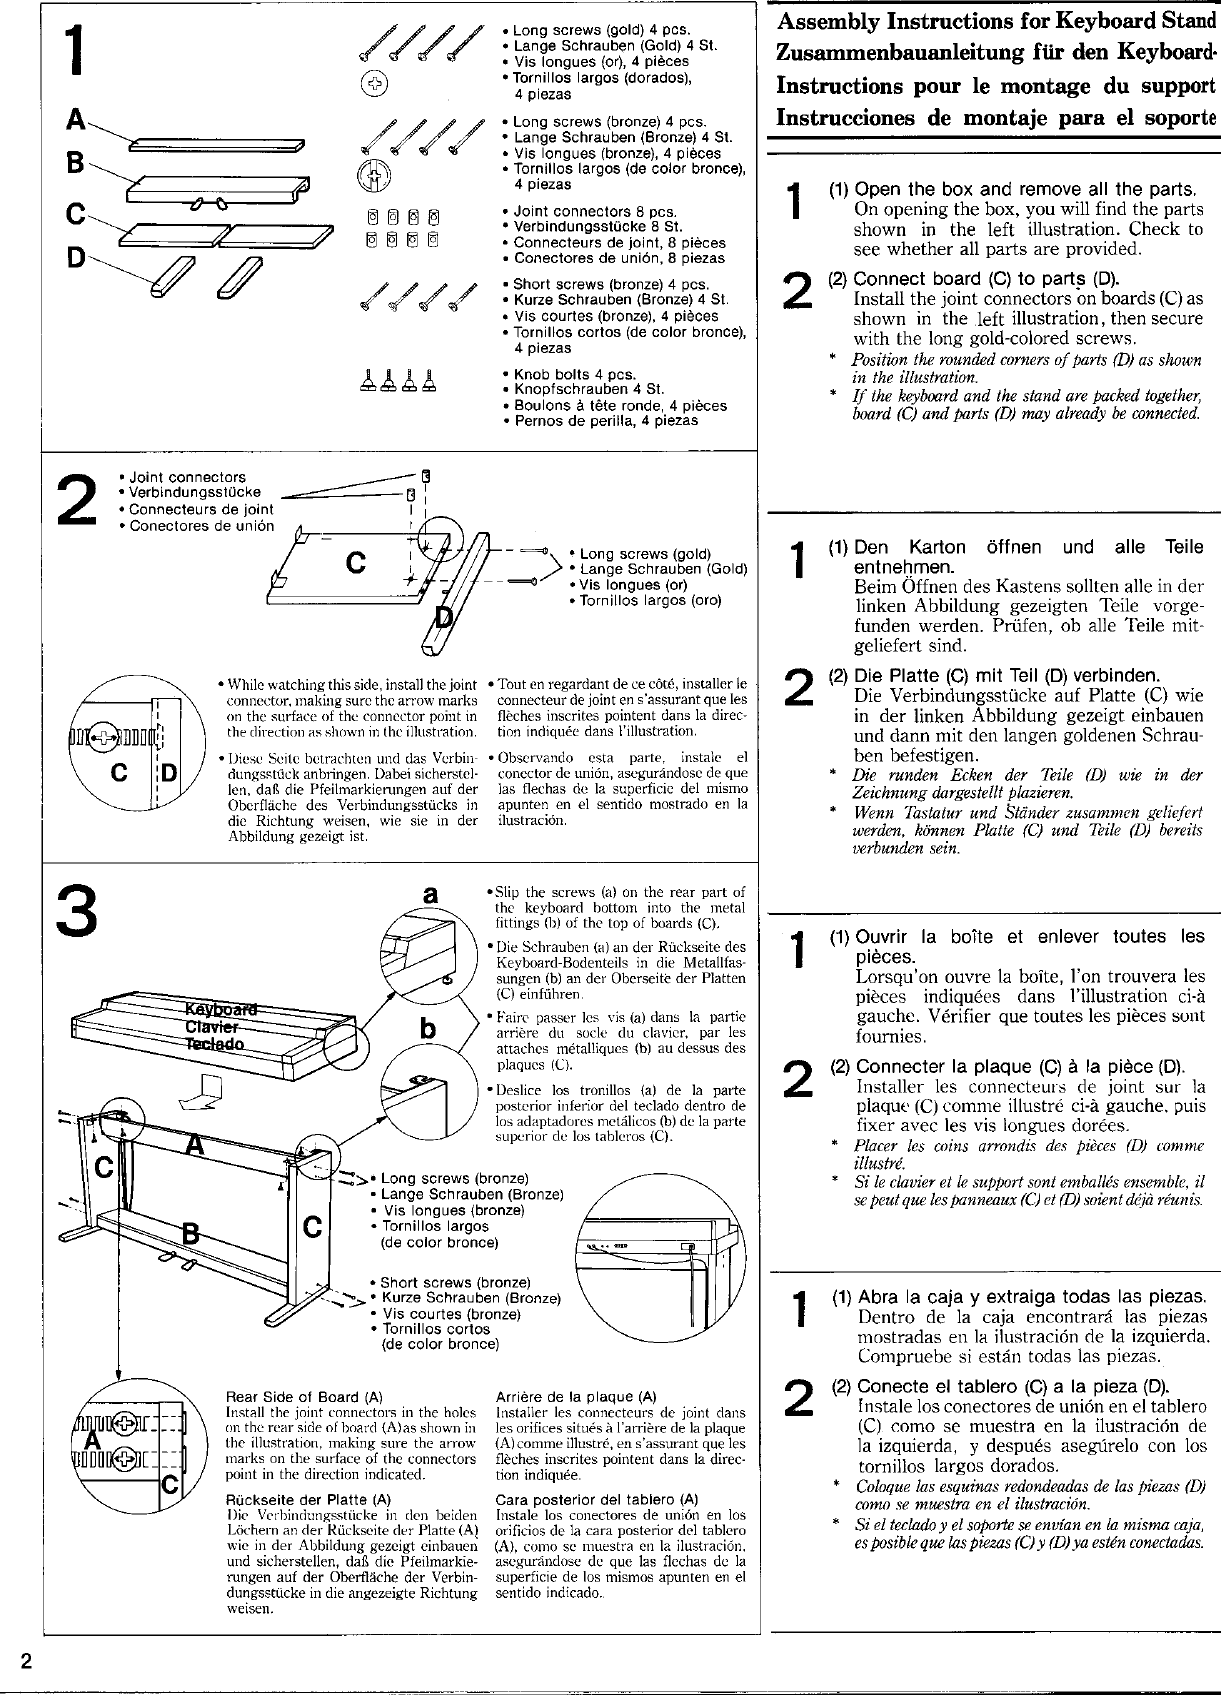 Page 4 of 11 - Yamaha  CLP-300/CLP-200 Owner's Manual (Image) CLP300S